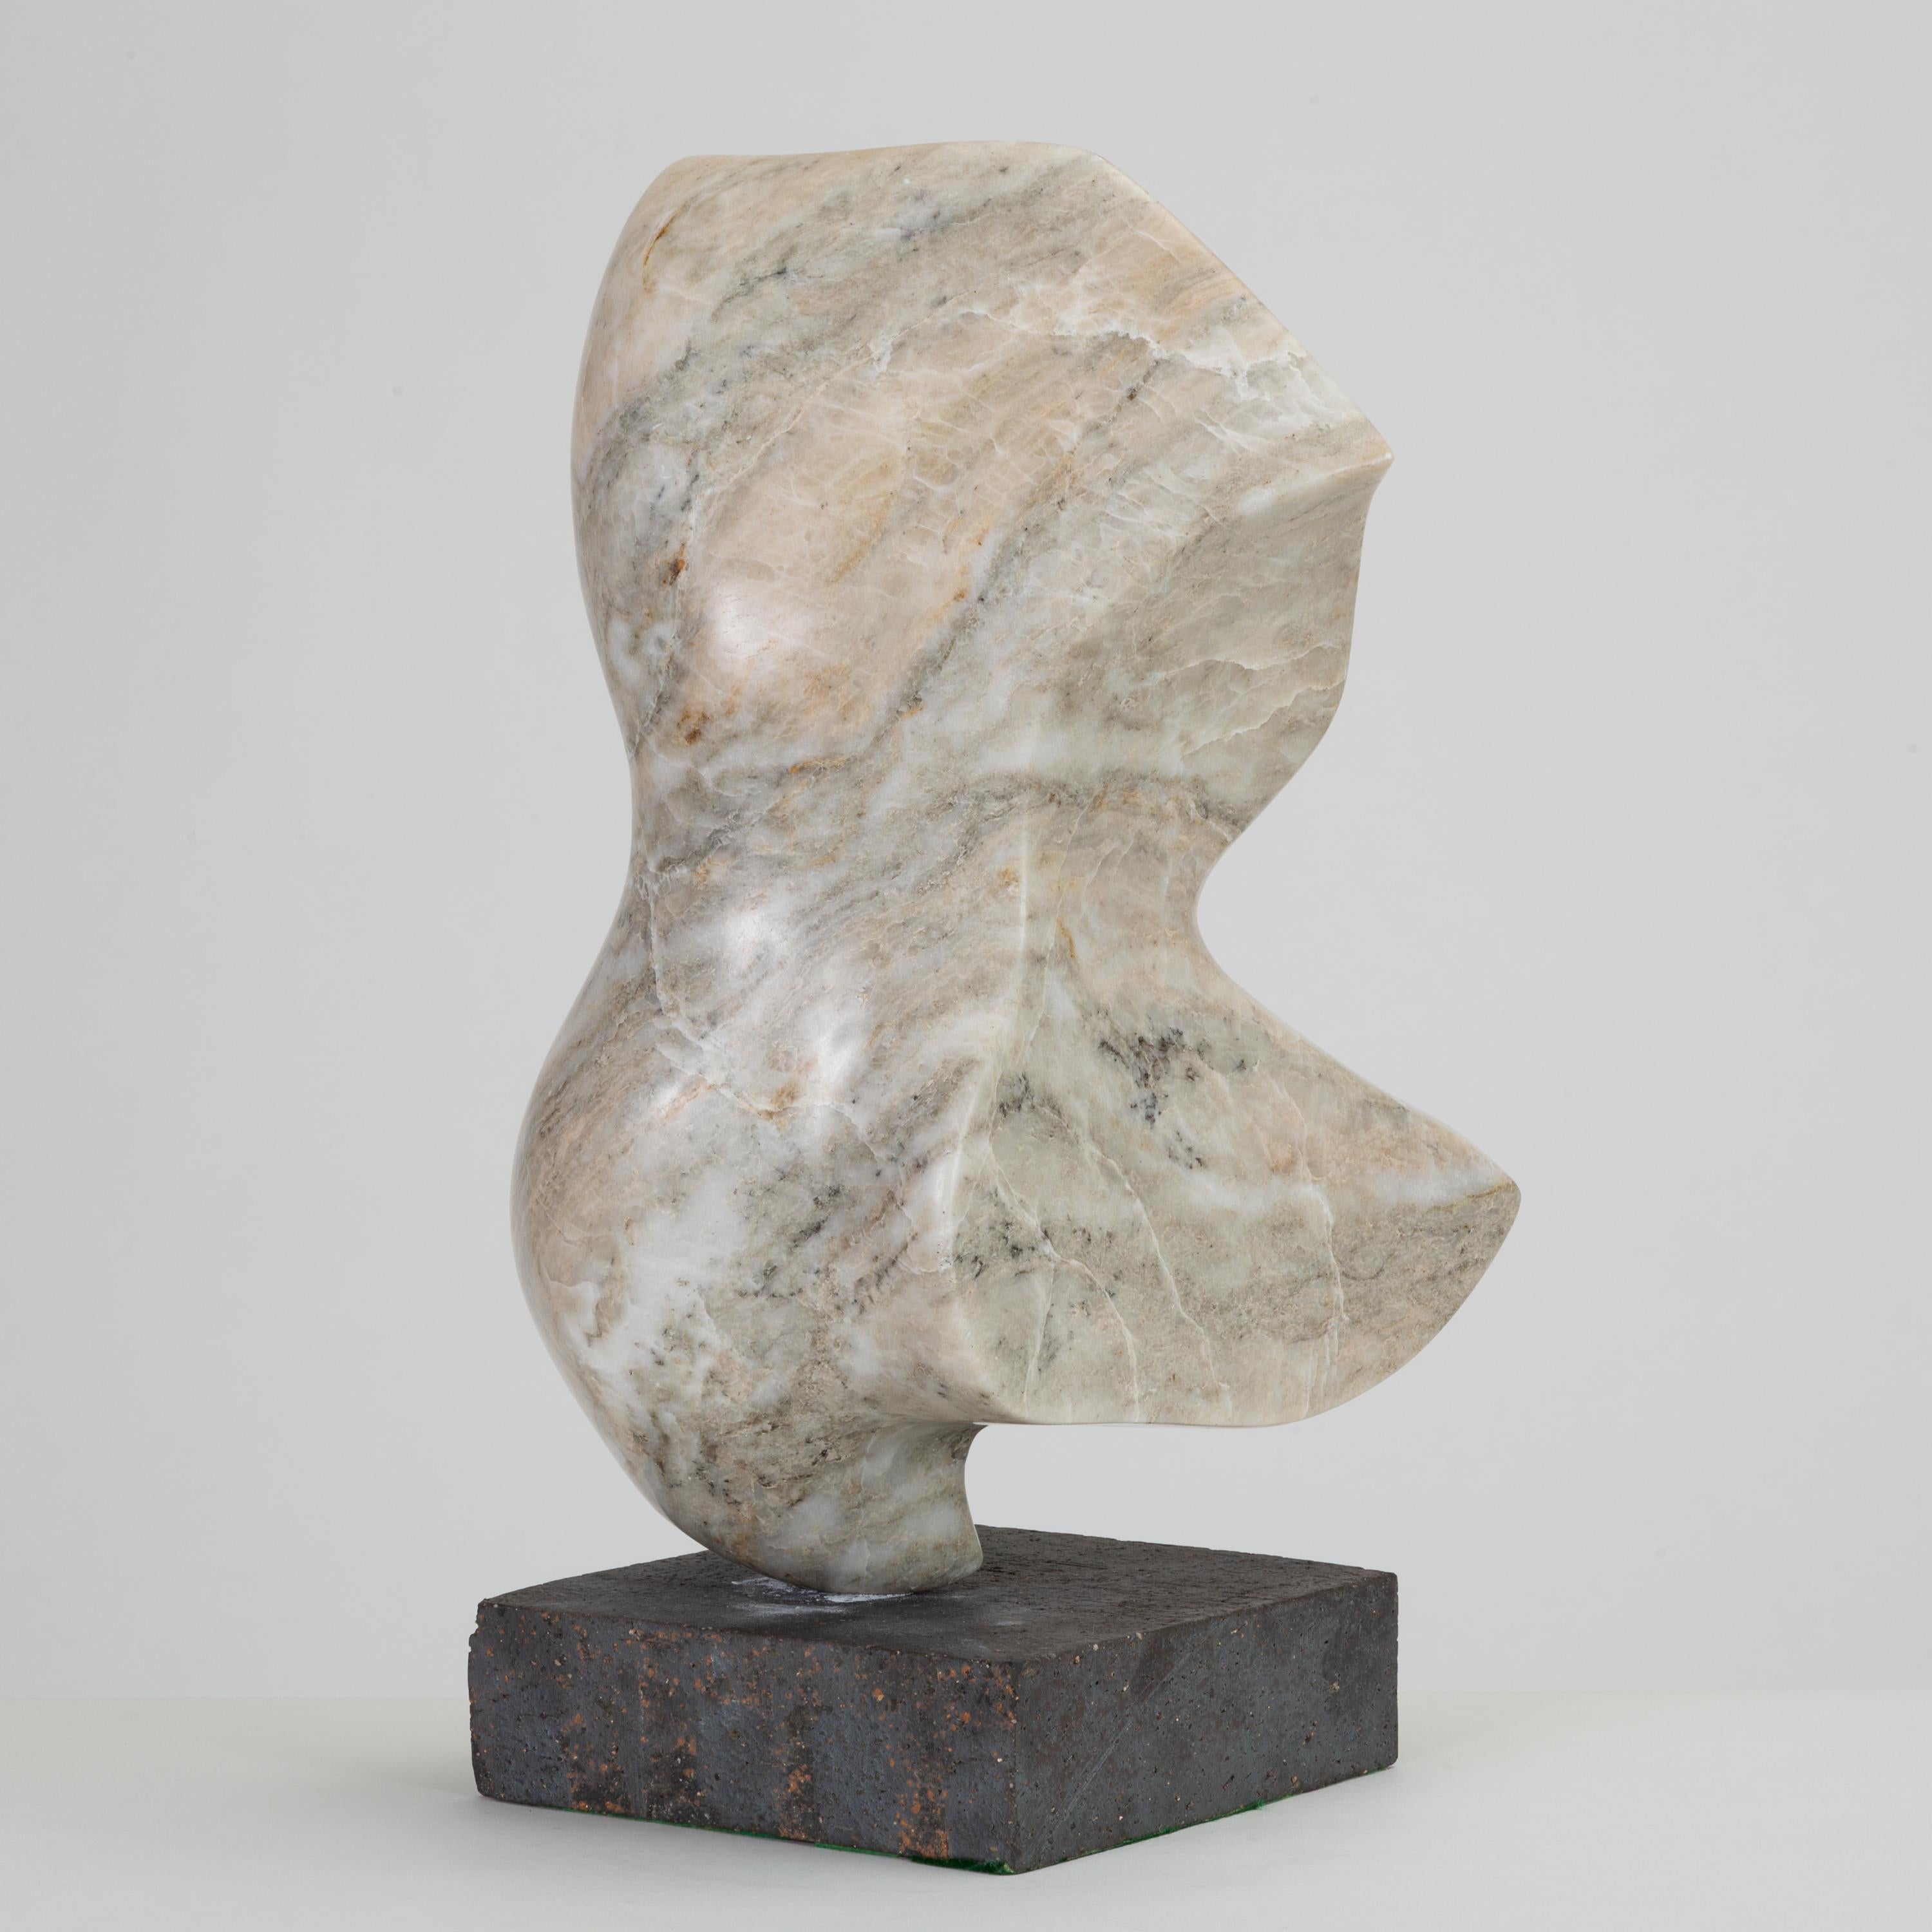 A gray marble sculpture, touched with notes of ochre and cinnamon. The abstracted form, mounted on a gray brick base, has a biomorphic form, with subtle veining in blush and charcoal following the curves of the figure. 

Condition: Excellent